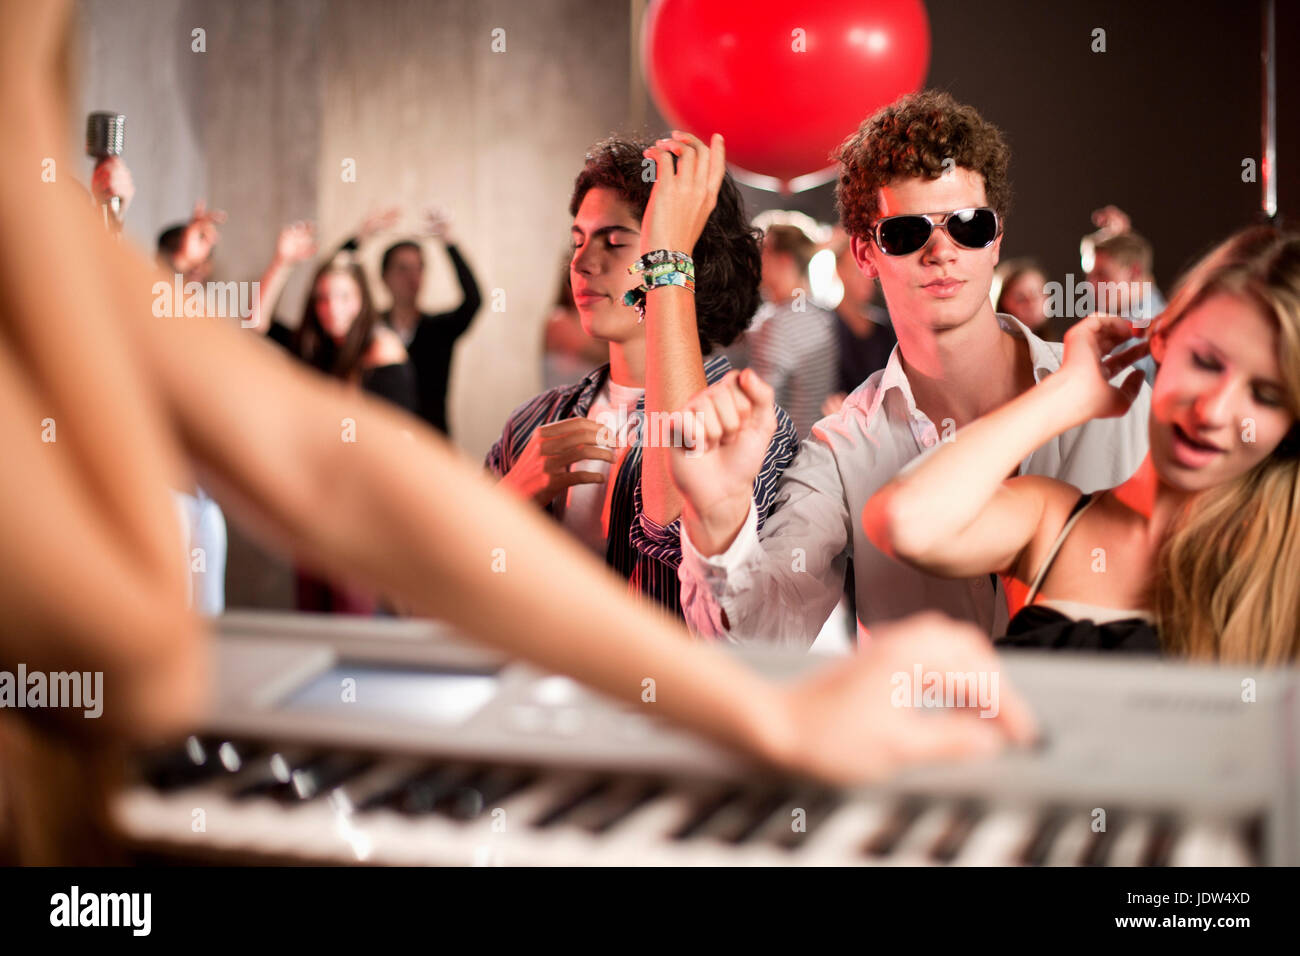 Young woman playing keyboard in nightclub Banque D'Images